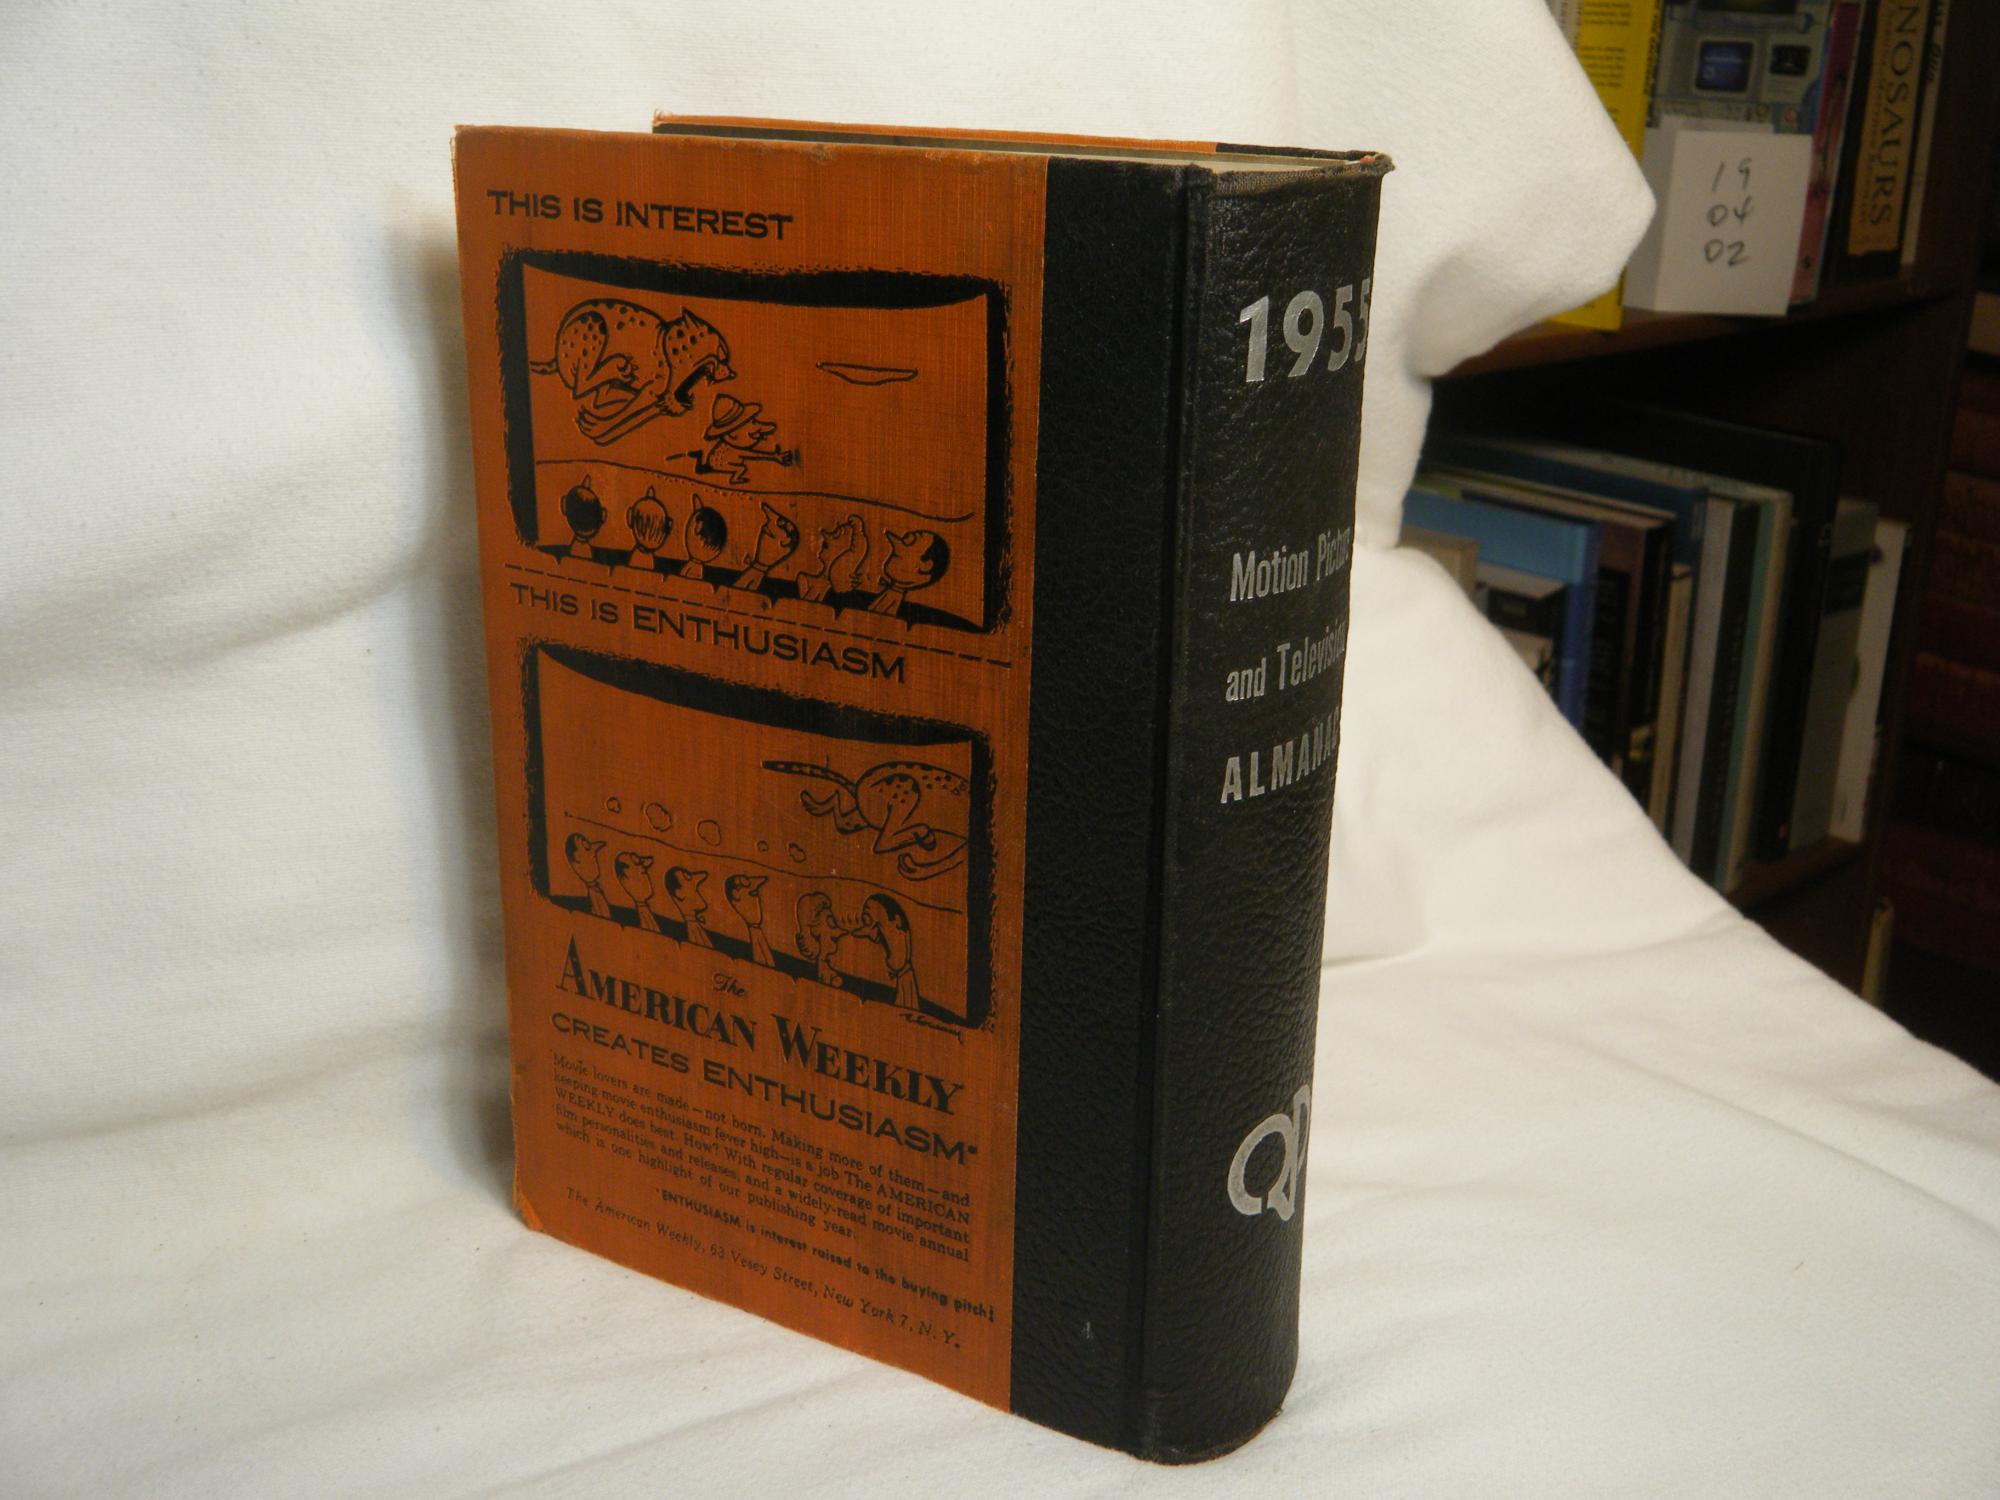 1955 Motion Picture and Television Almanac by Aaronson, Charles S ...